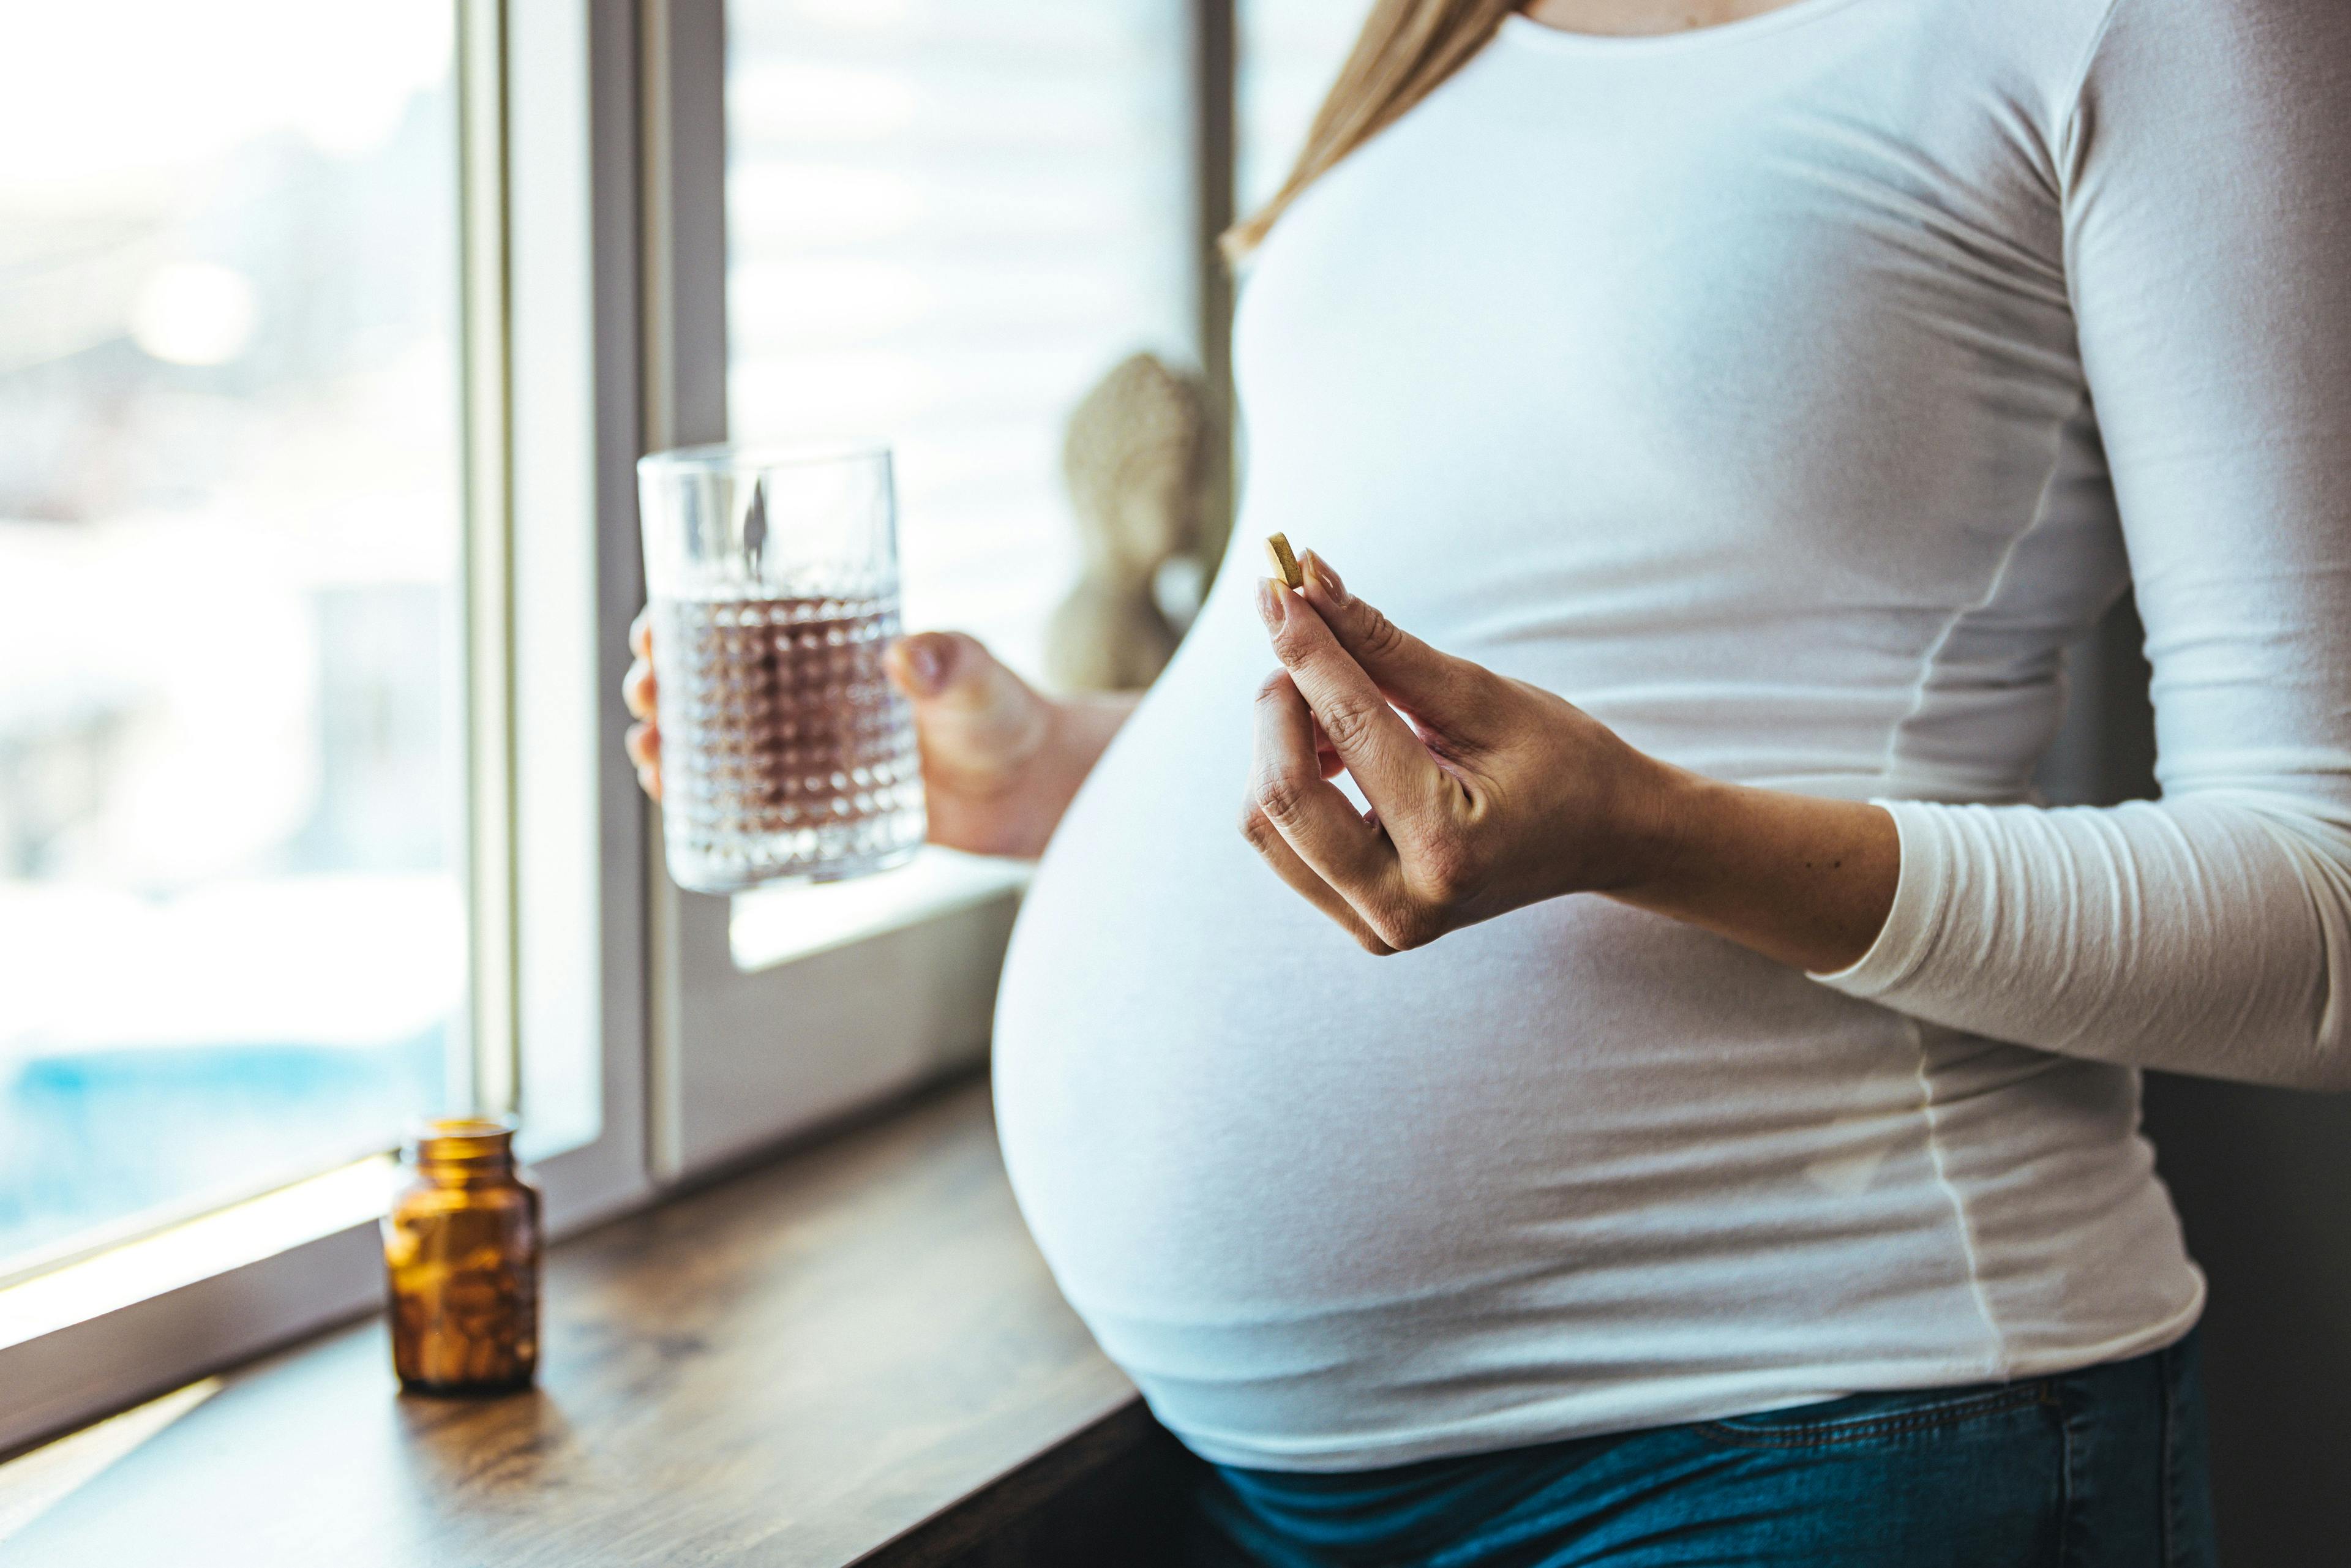 Folate, an essential water soluble vitamin found in many nutrients, is often advised for pregnant women to supplement their nutrition during fetal development. Image Credit: © Dragana Gordic - stock.adobe.com